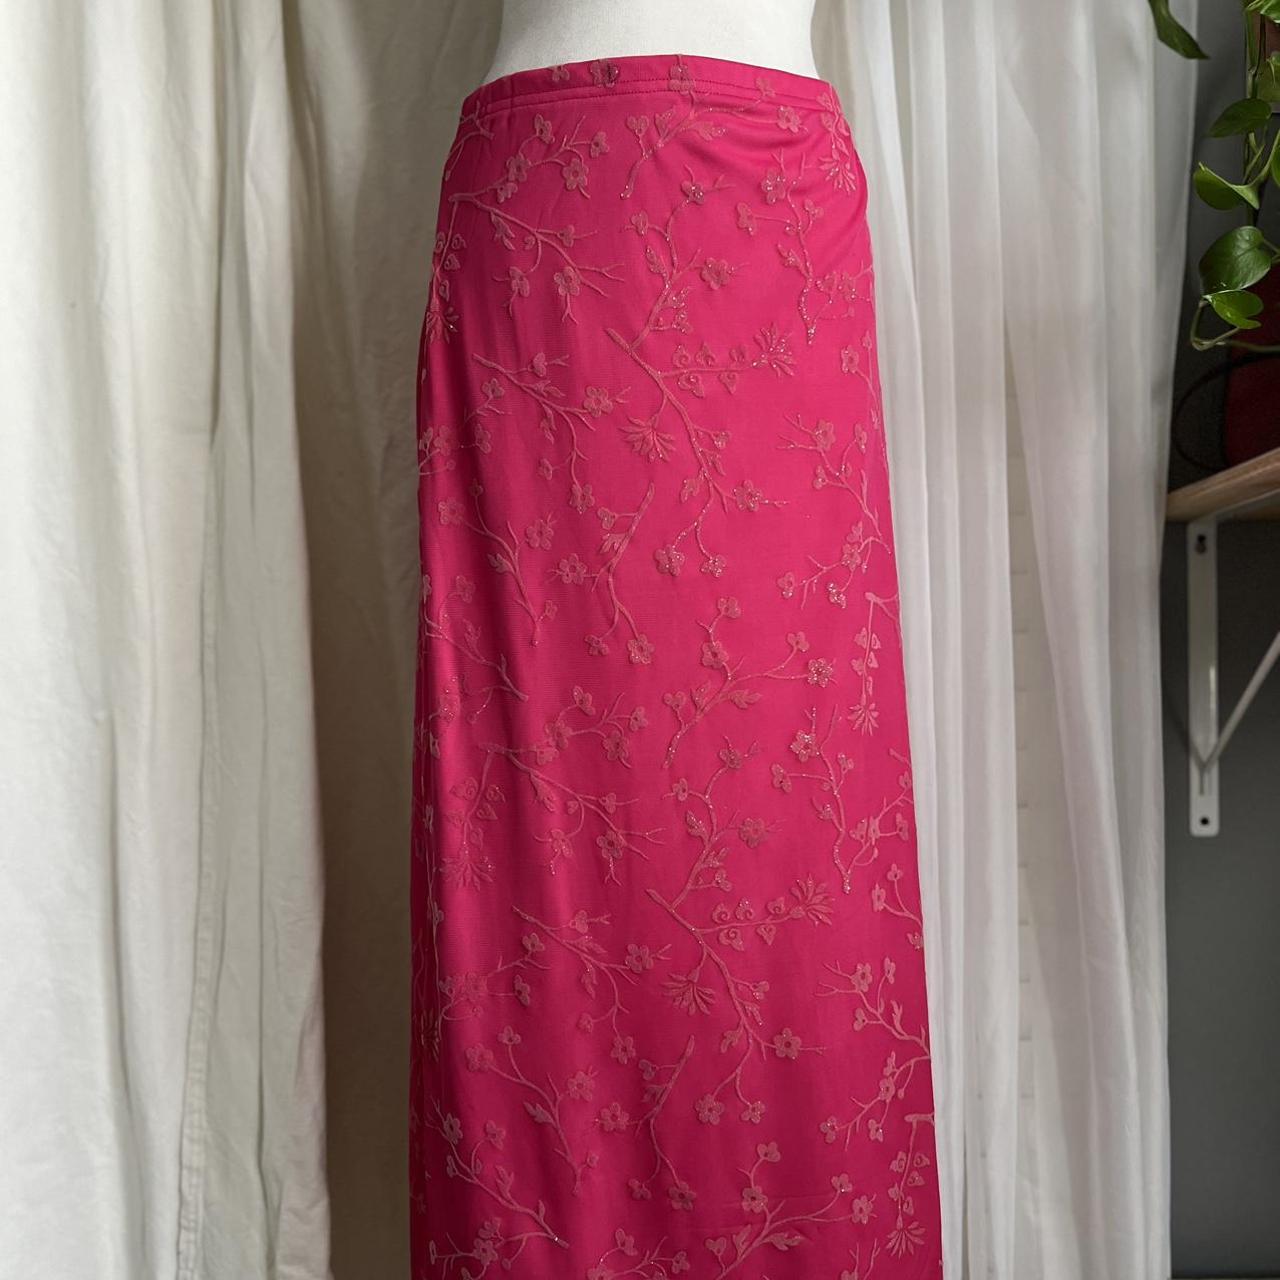 Hot pink maxi skirt 34in long has flowers and... - Depop